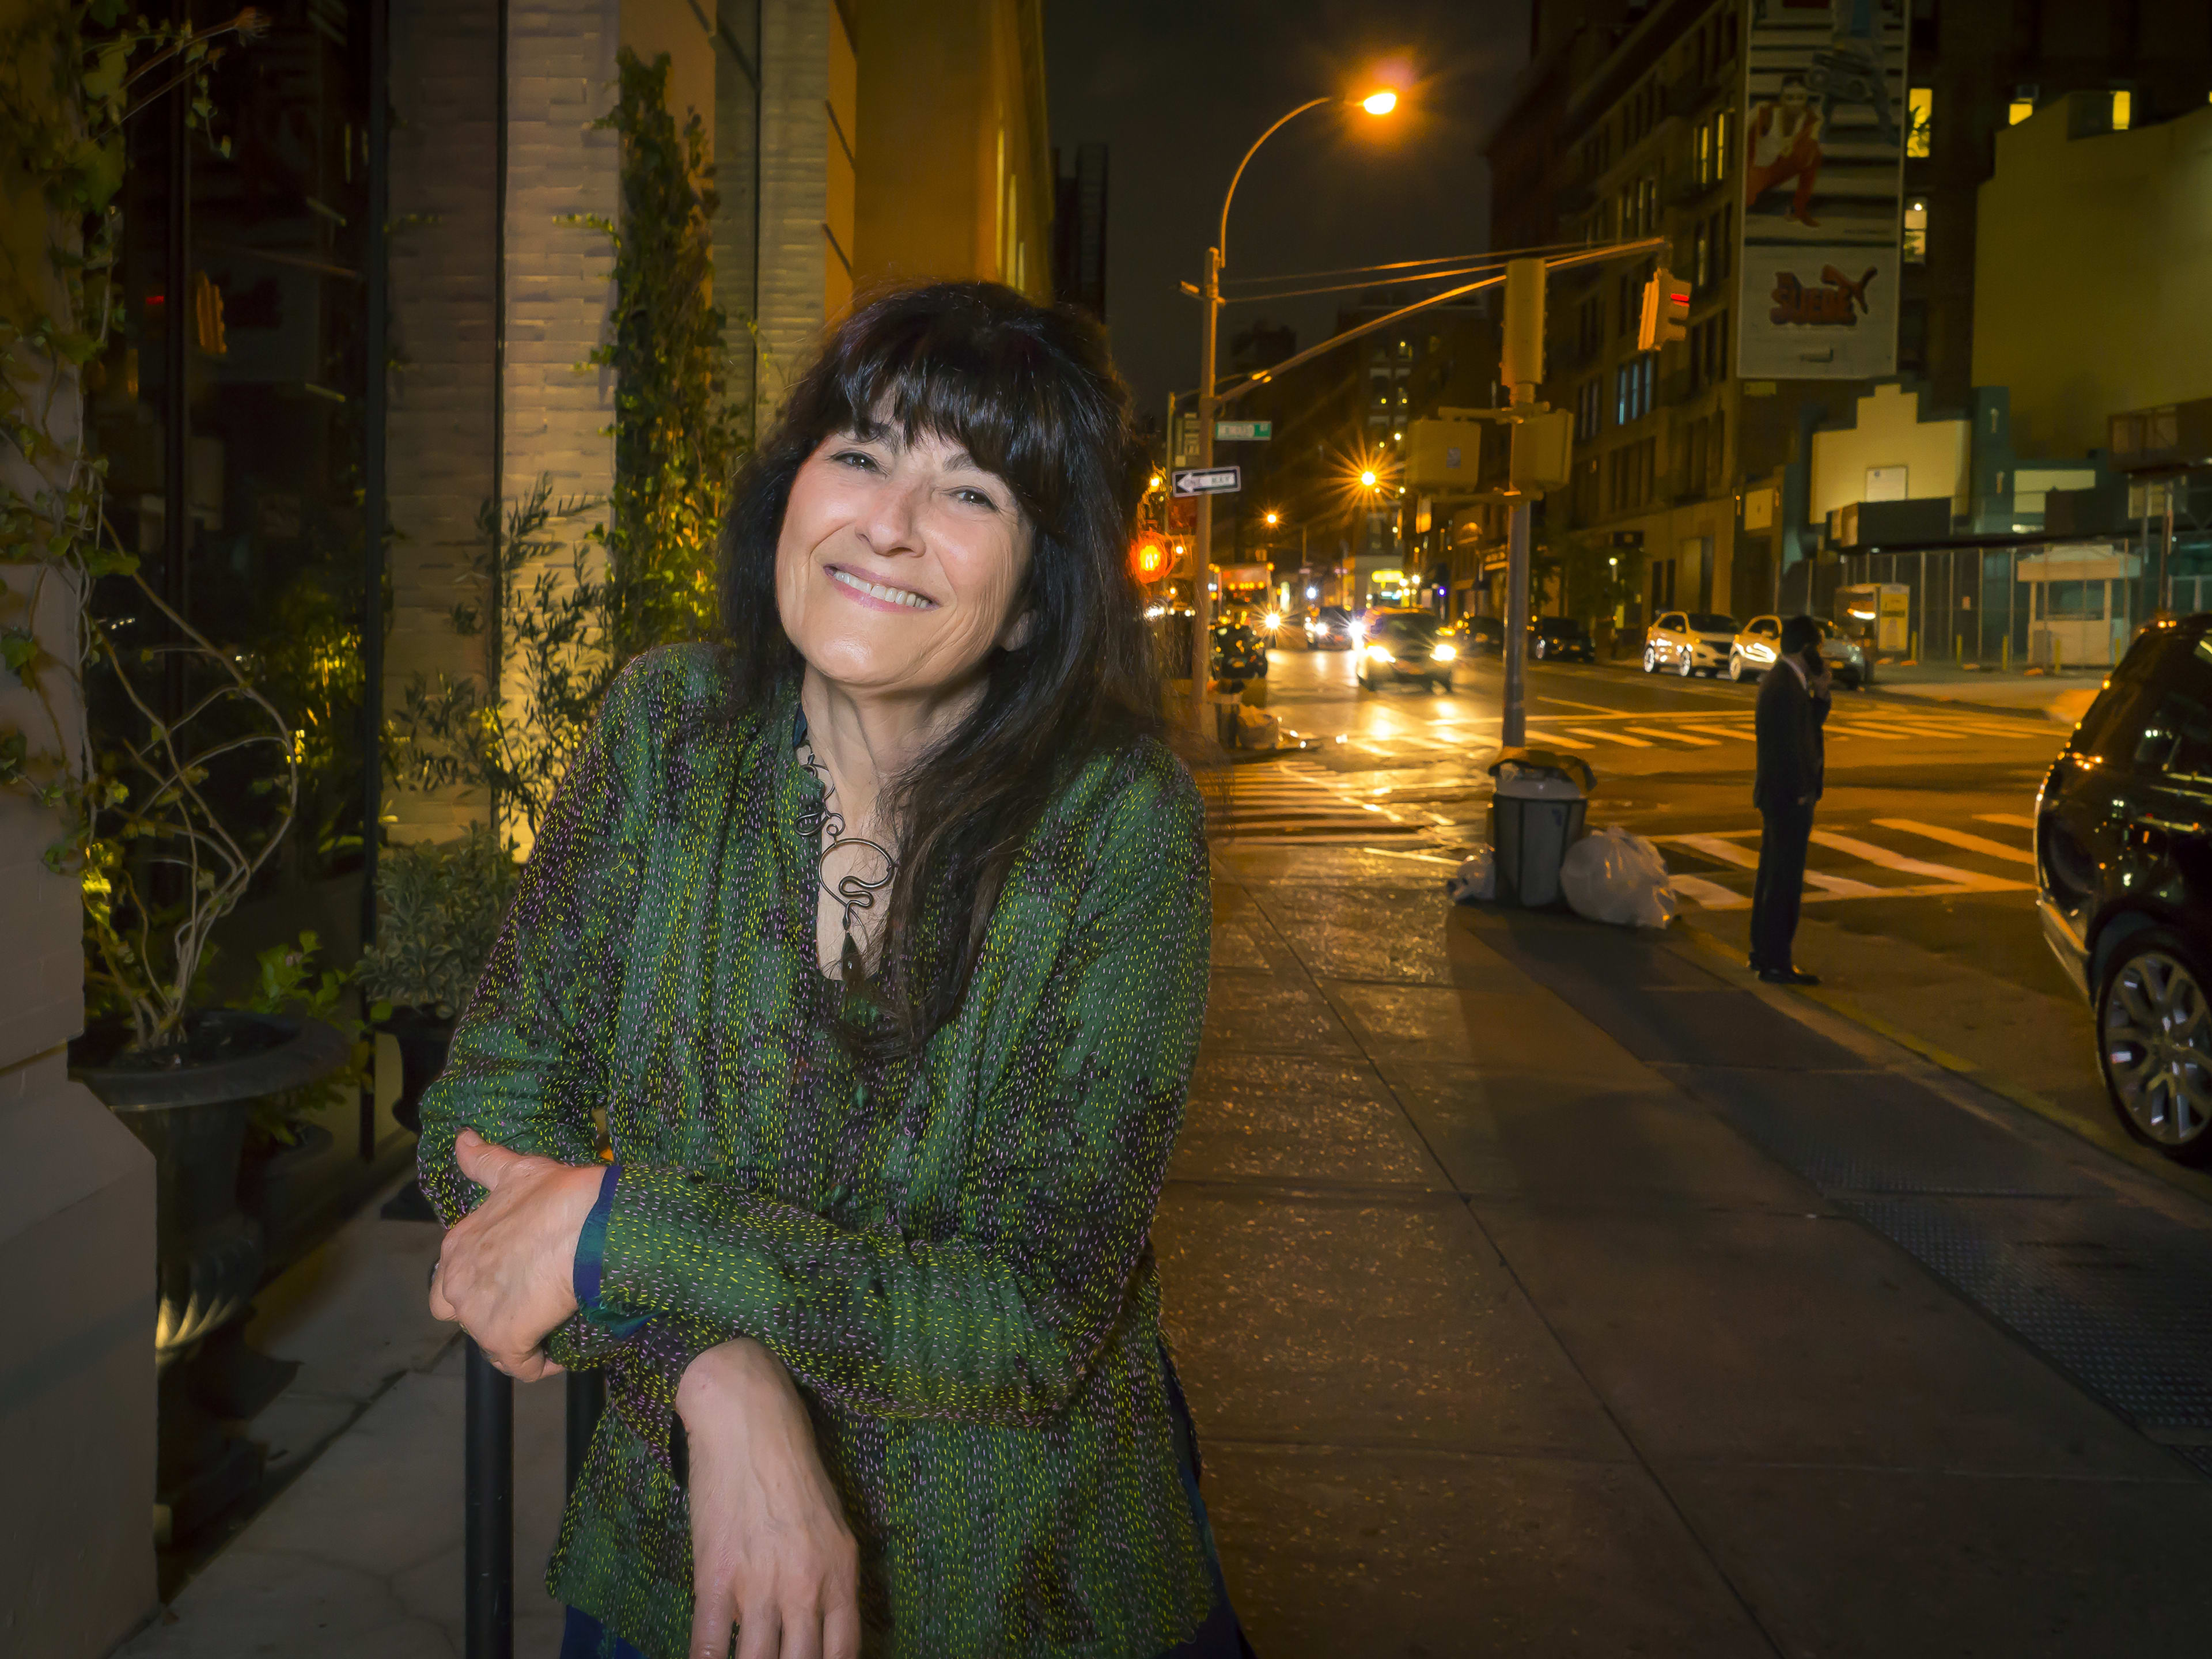 the food writer Ruth Reichl stands with her arms crossed, wearing a green outfit, on a dark nighttime New York City sidewalk as cars approach on the street behind her